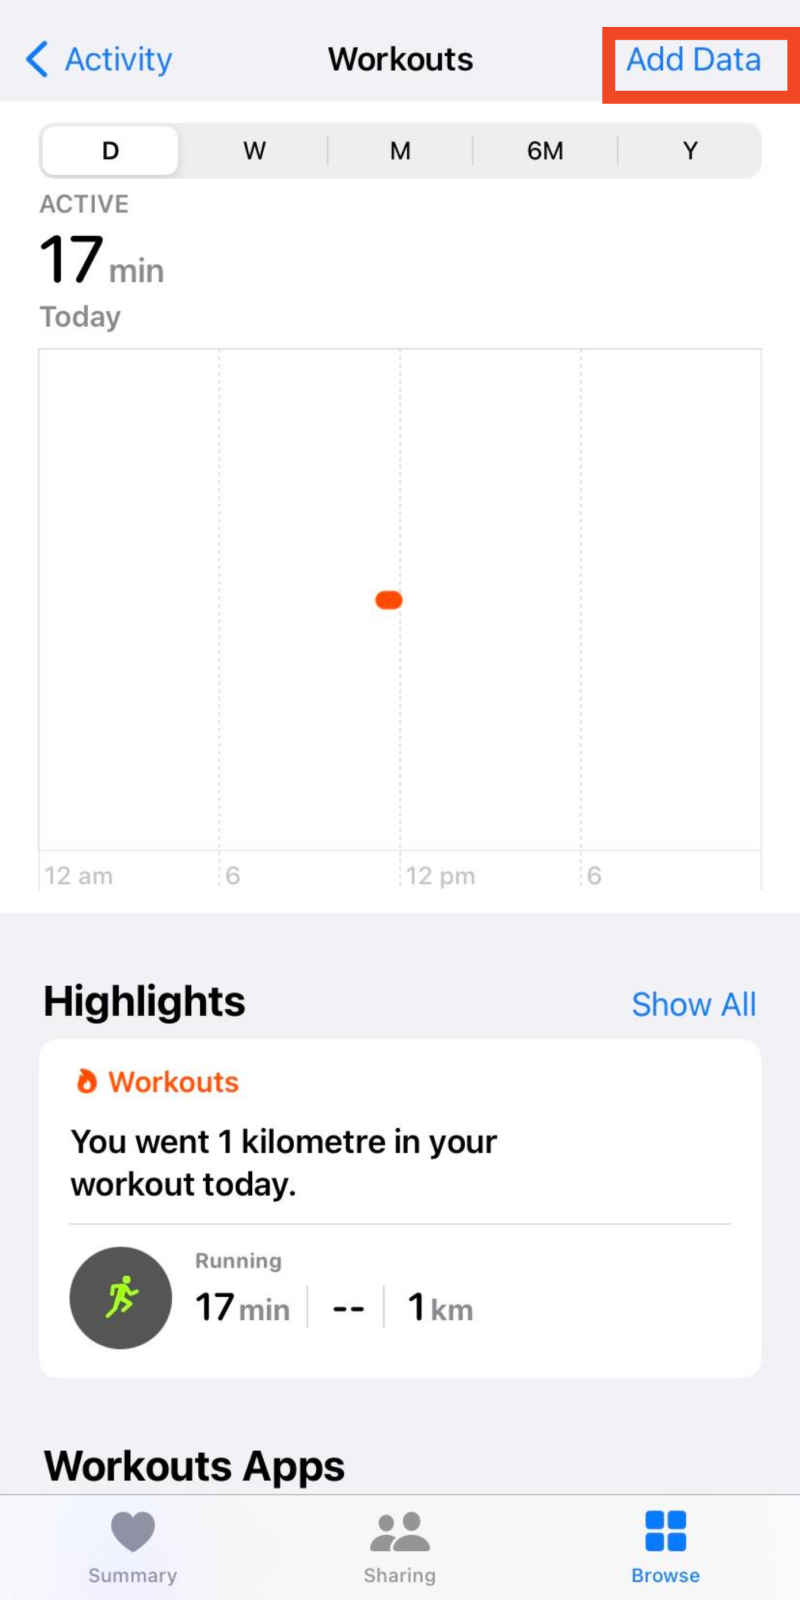 Add data option in the right corner of the screen in the Workout section under the Health app on iPhone